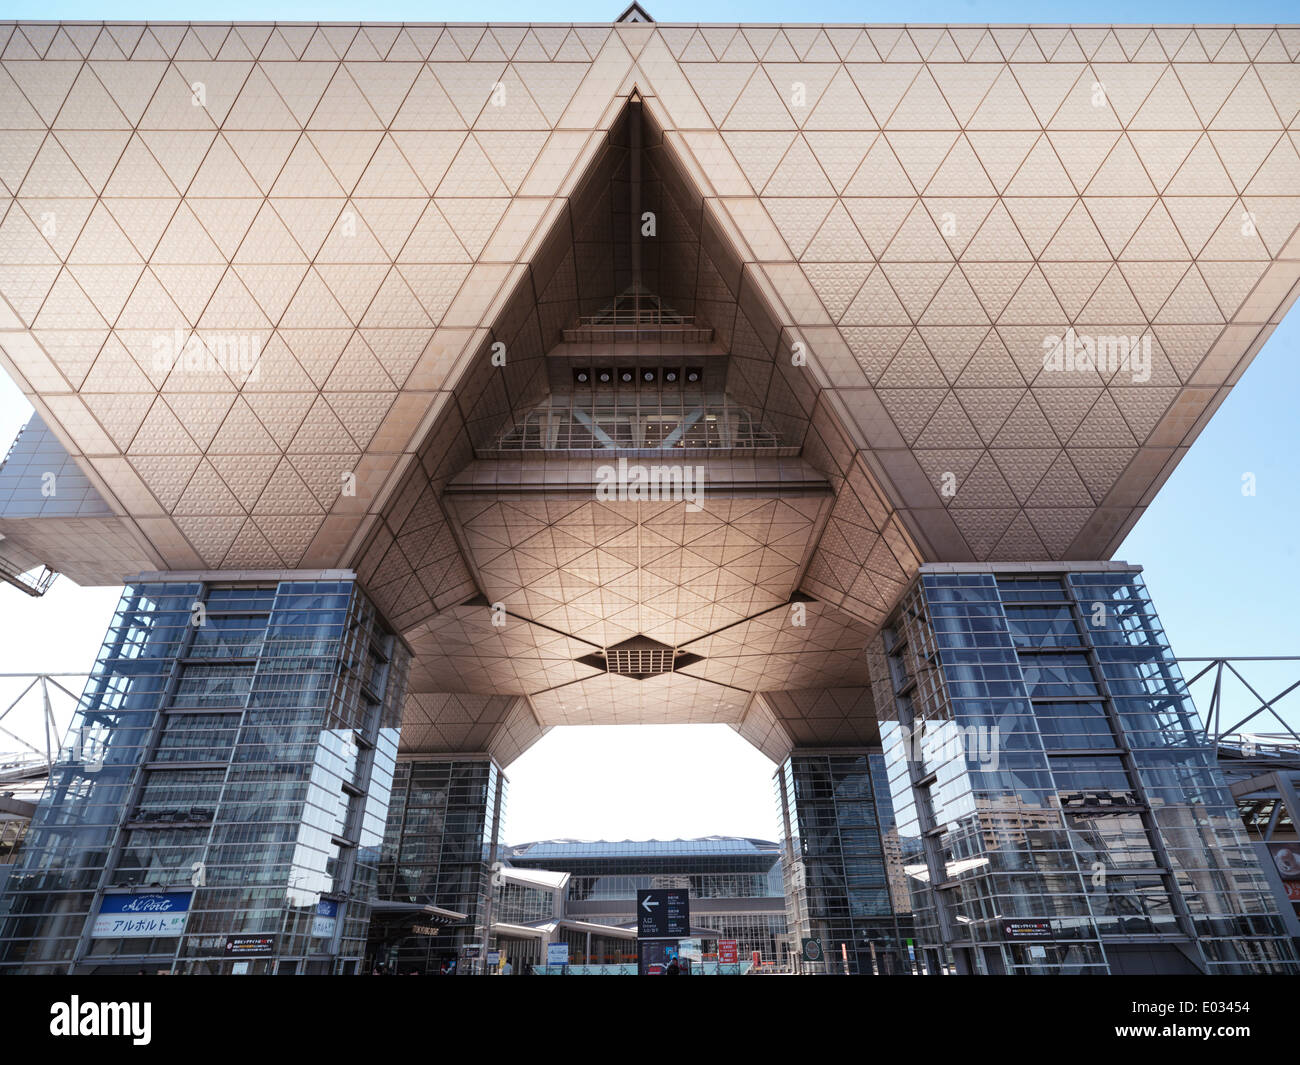 Licenza disponibile su MaximImages.com - The Conference Tower of Tokyo International Exhibition Center - Big Sight. Ariake, Odaiba, Tokyo, Giappone. Foto Stock